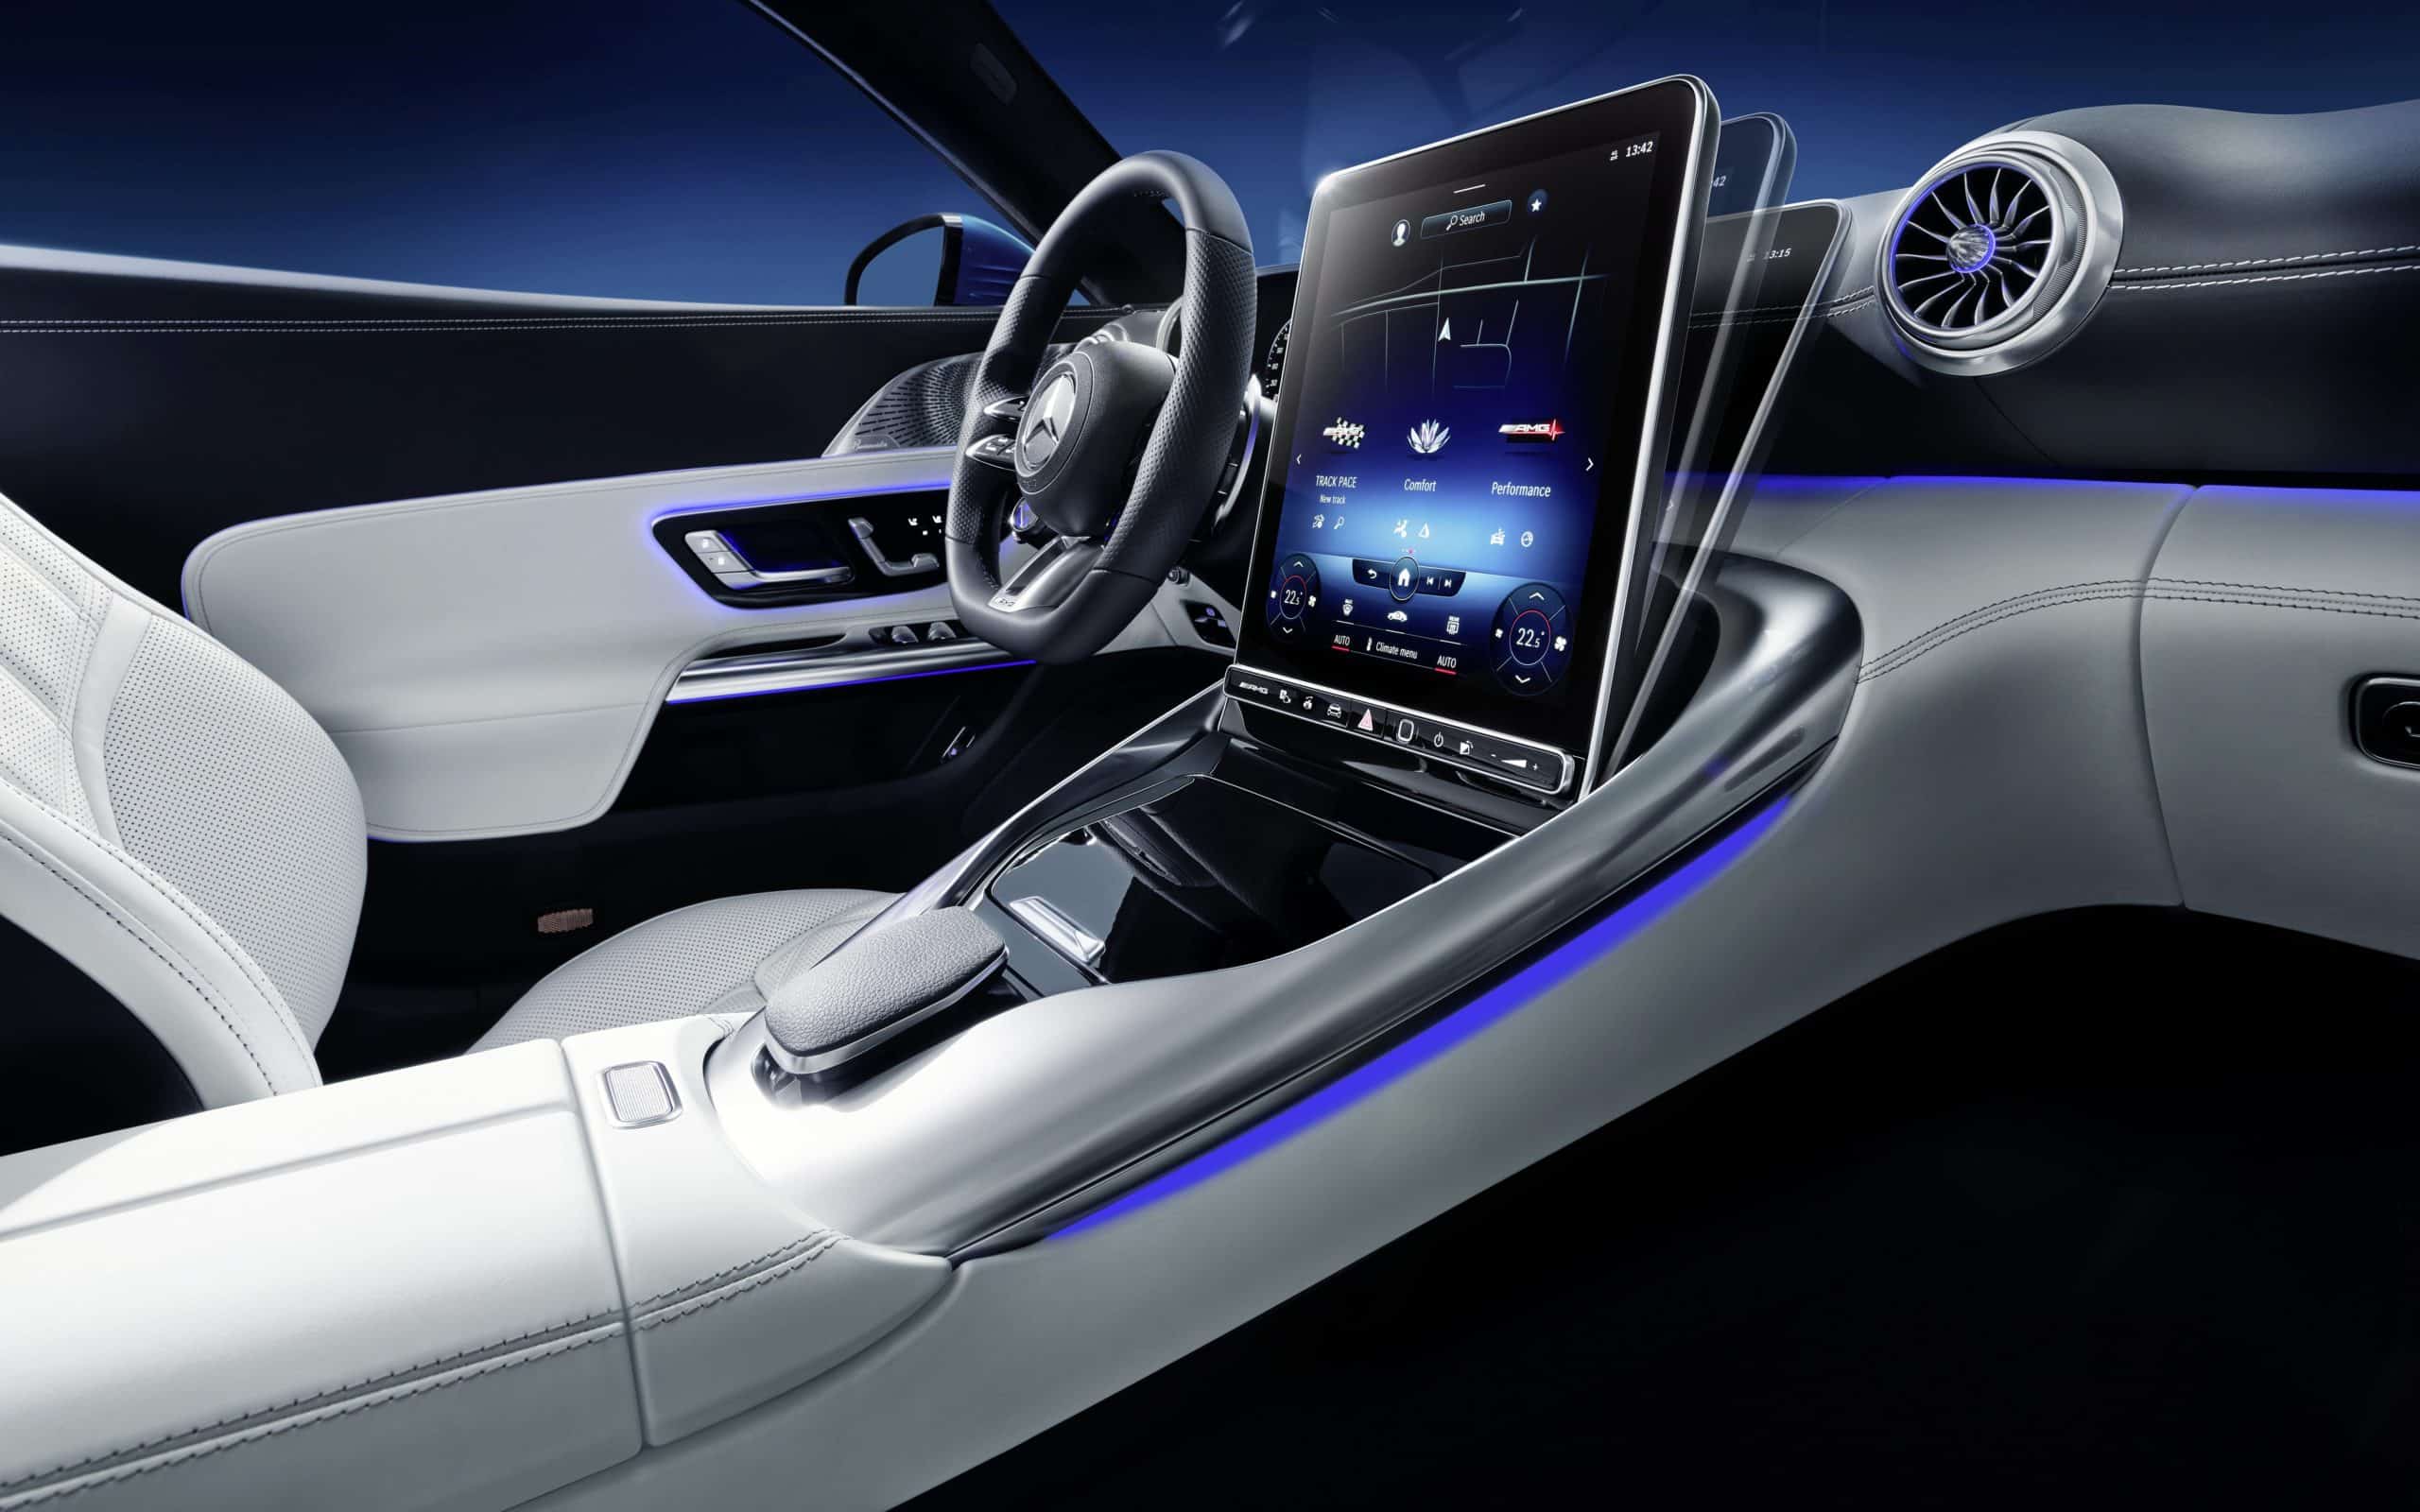 Here's an exclusive look at the interiors of the all-new Mercedes-AMG SL